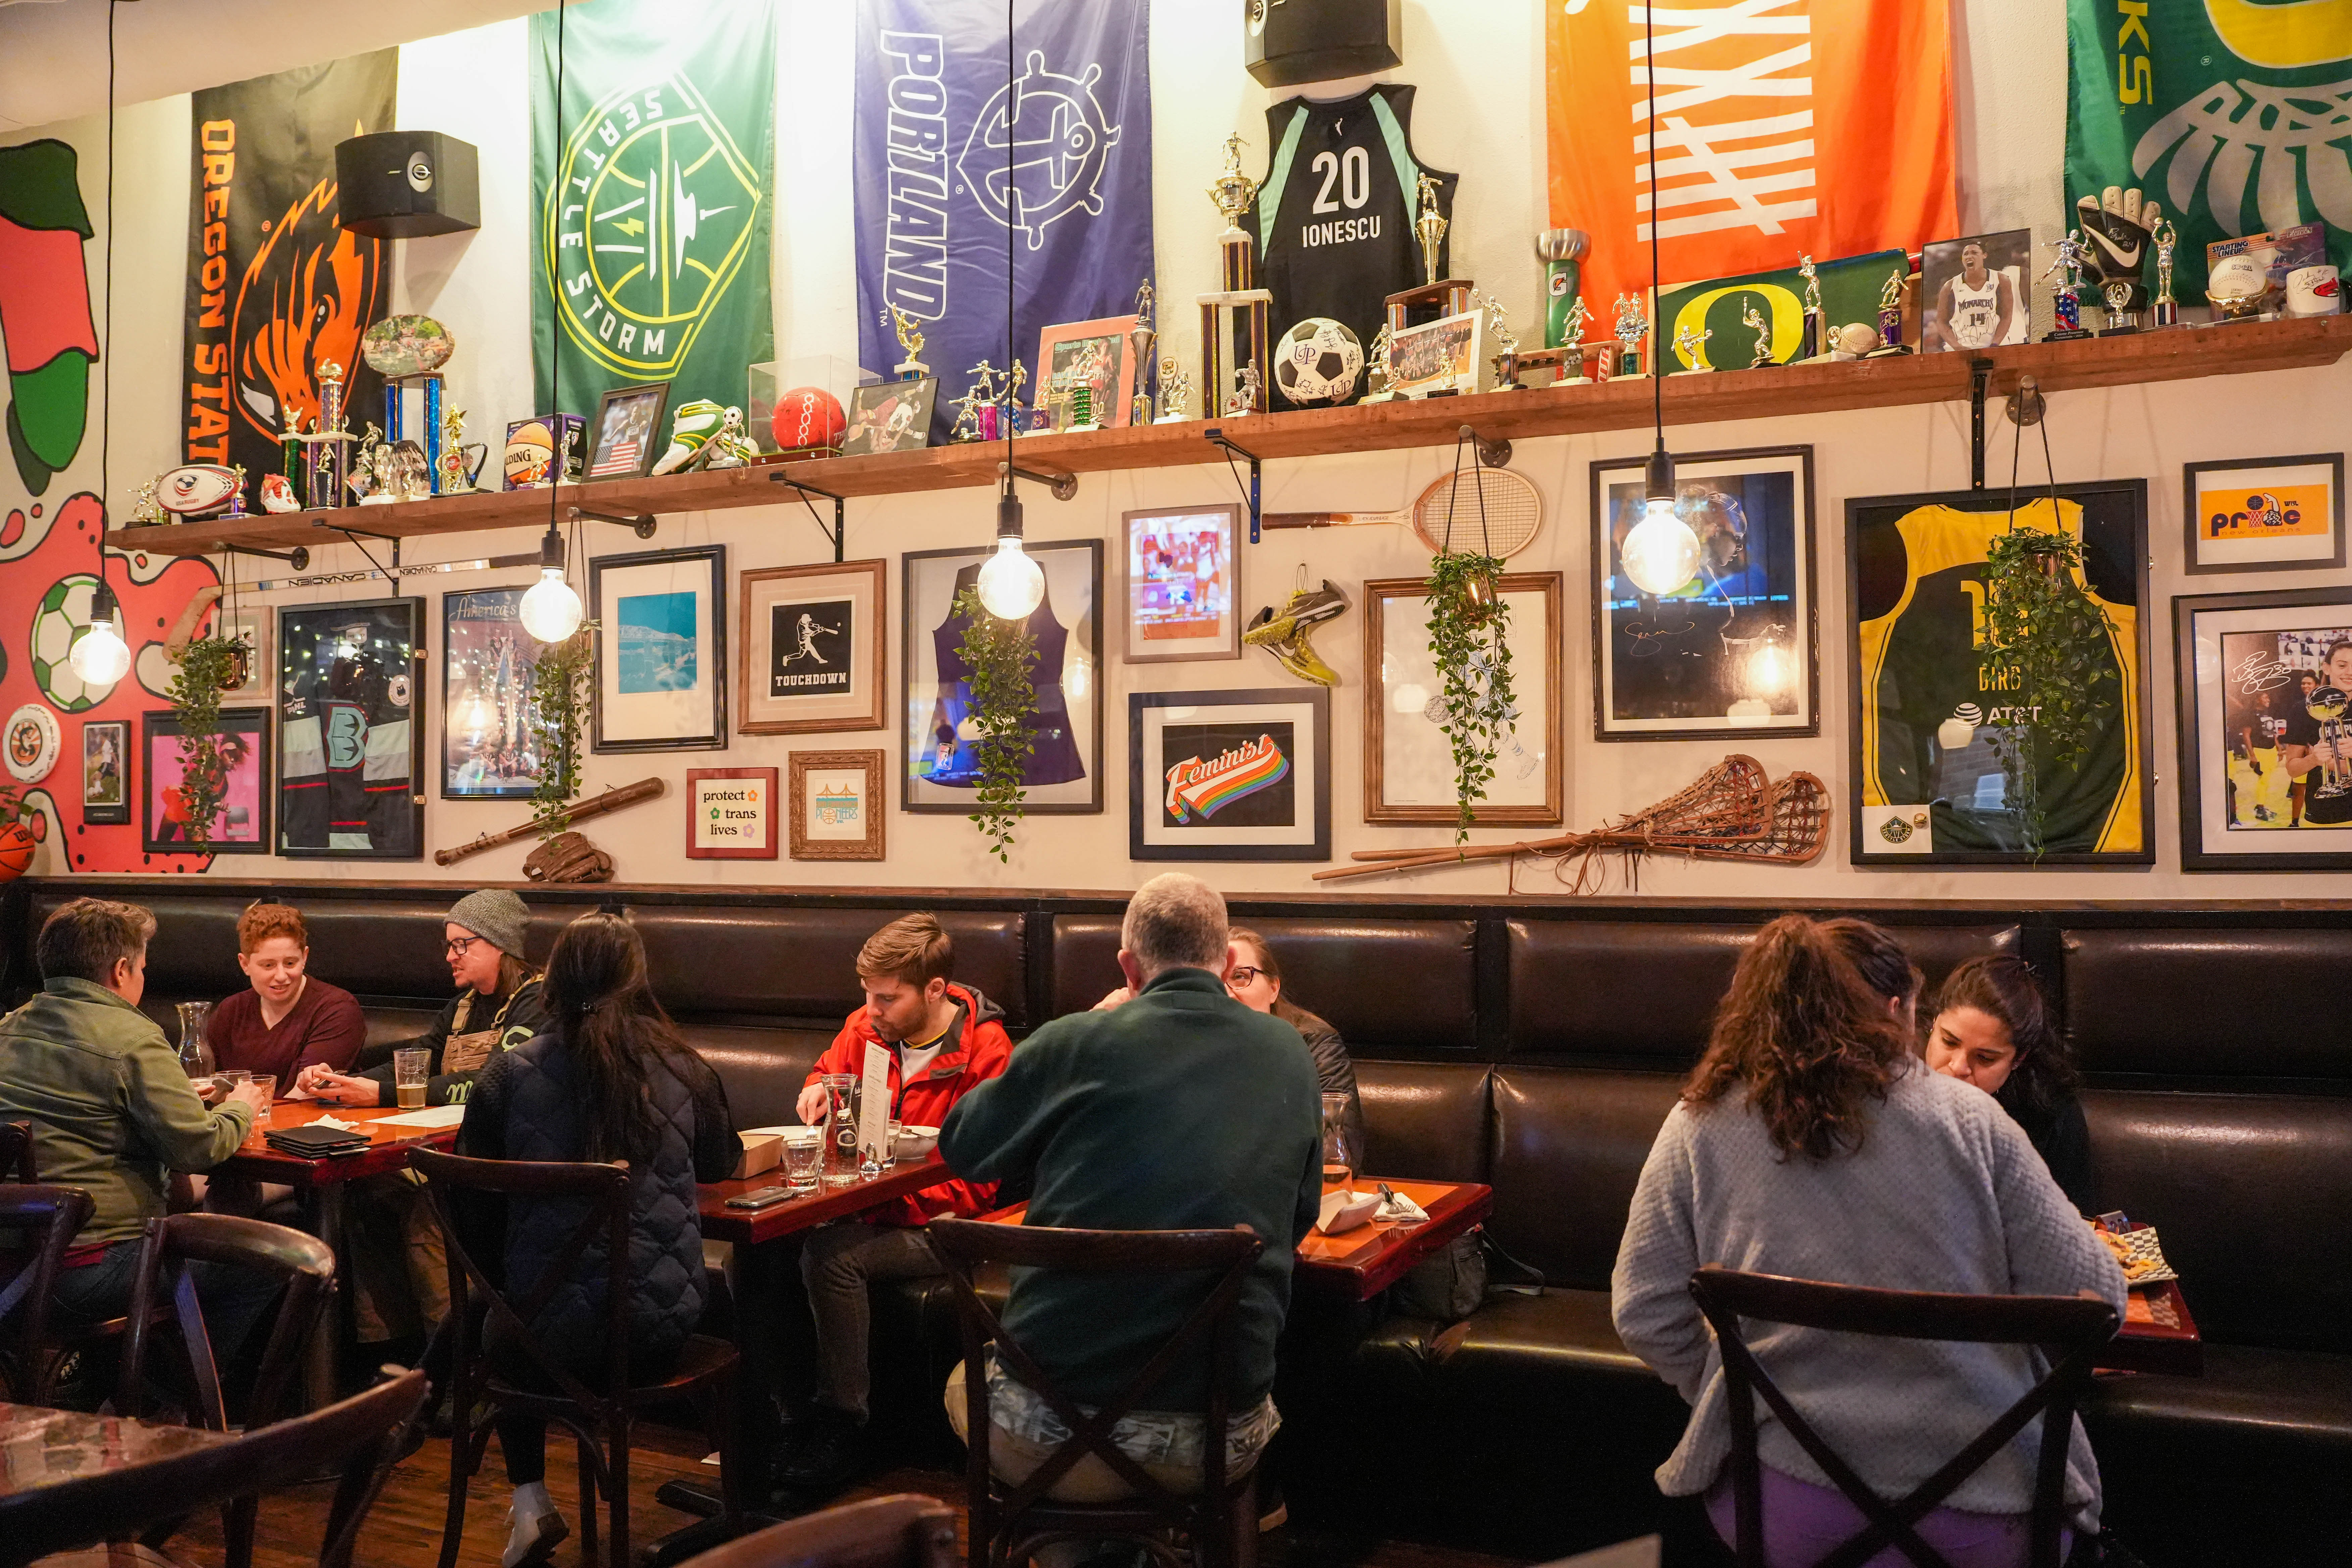 Customers dine at tables and booths with sports memorabilia on the walls